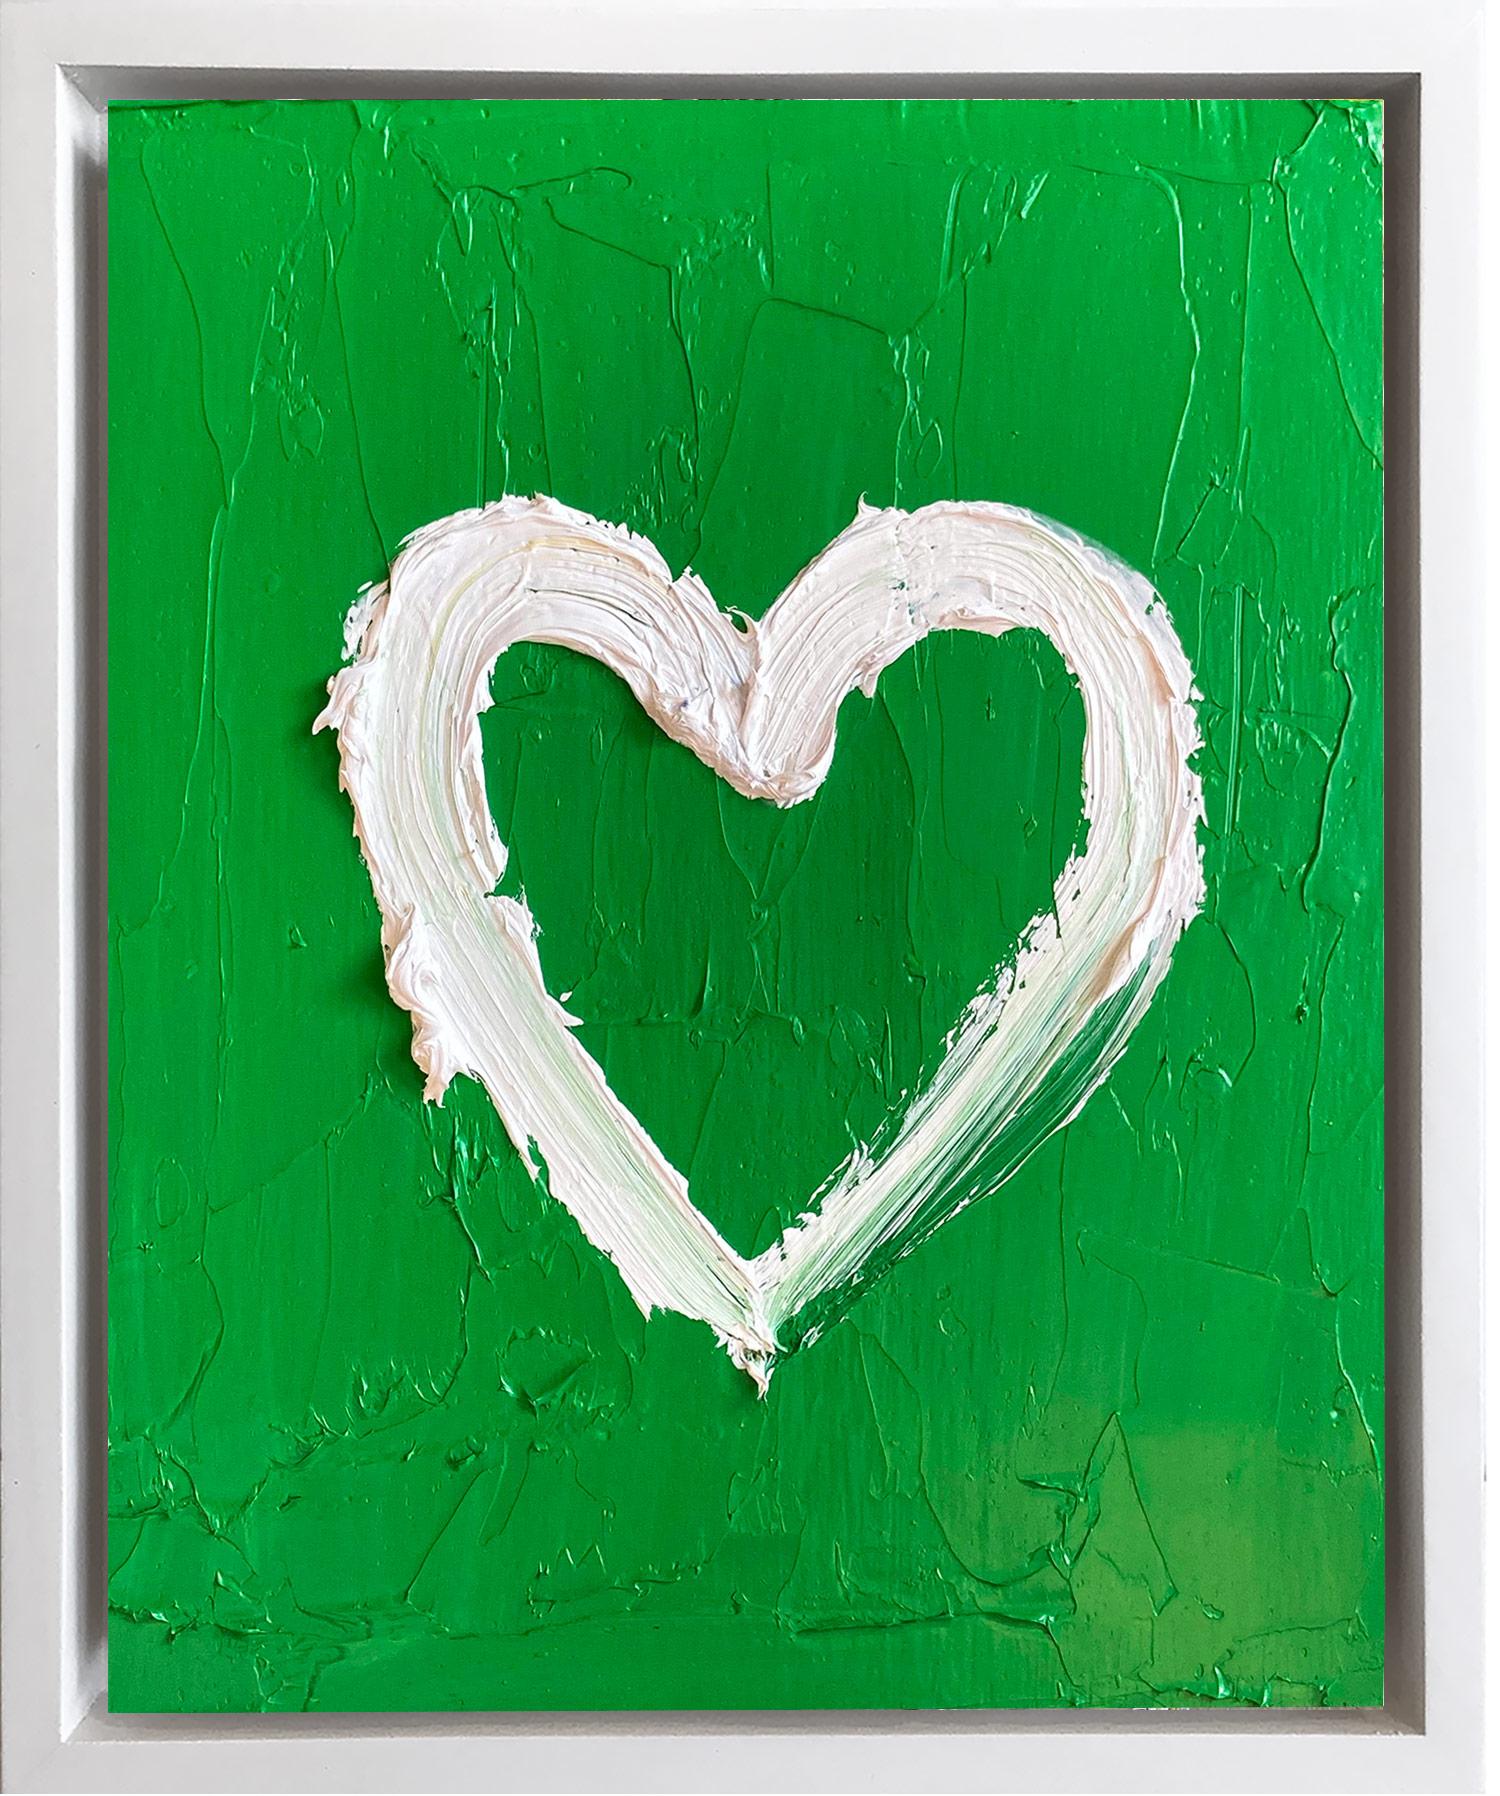 Cindy Shaoul Figurative Painting - "My Lucky Heart" Contemporary Pop Art Oil Painting with Floater Frame